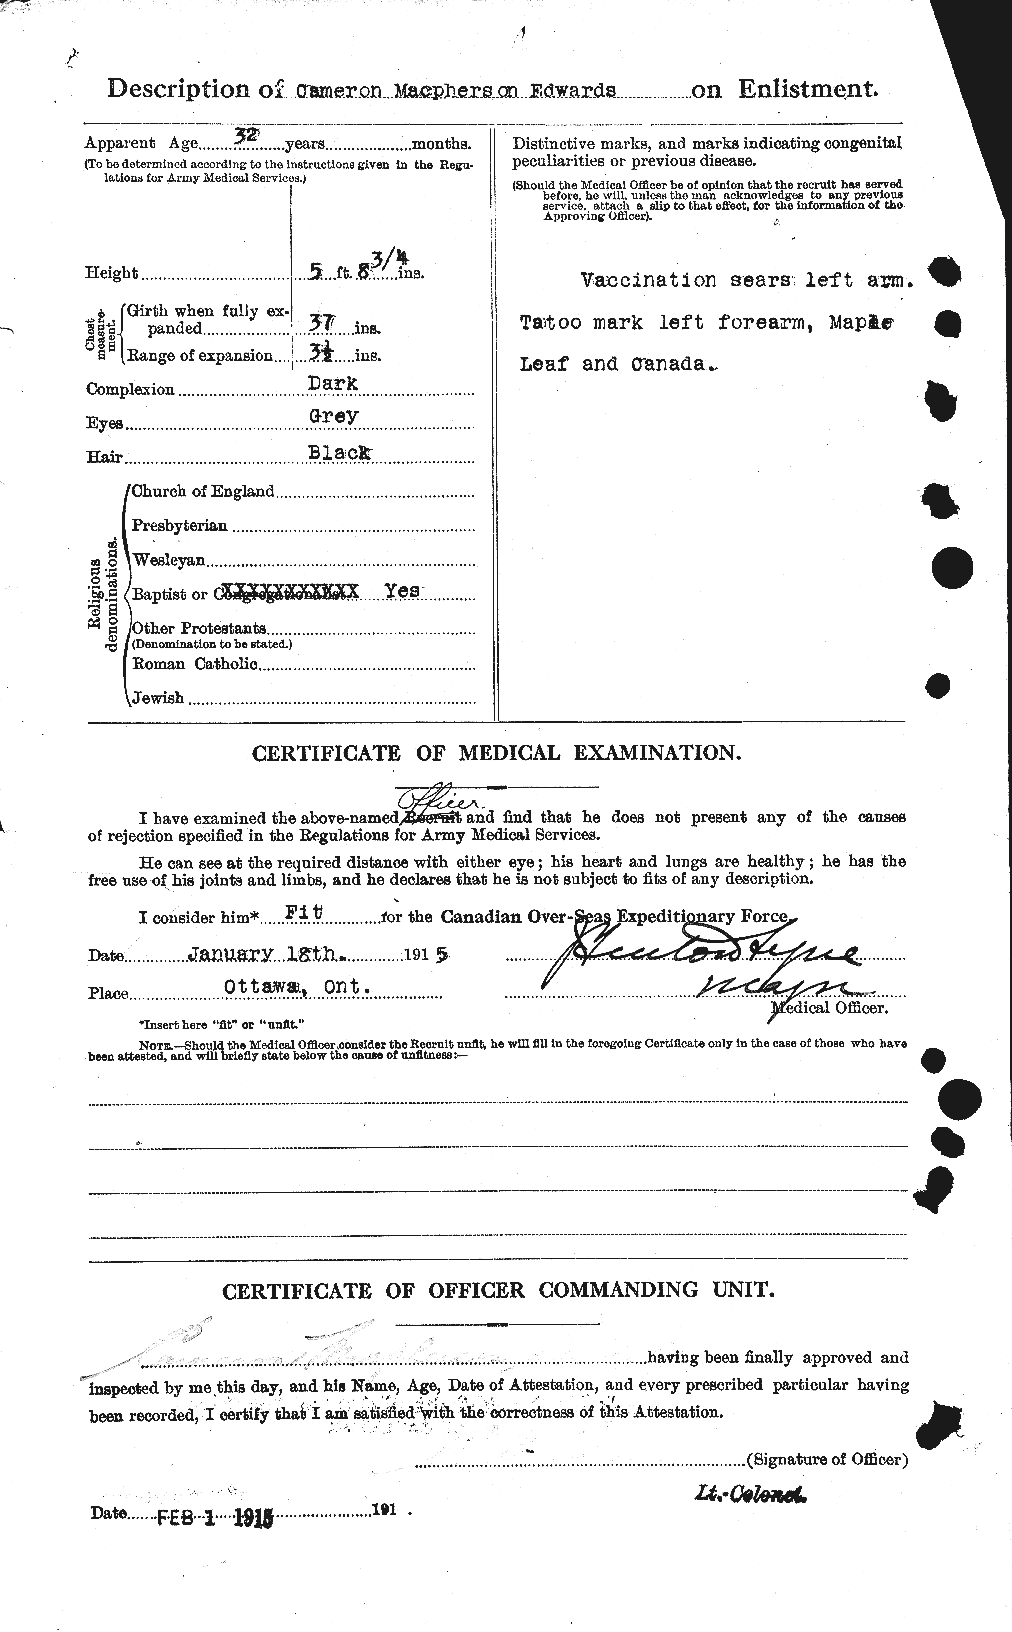 Personnel Records of the First World War - CEF 313154b